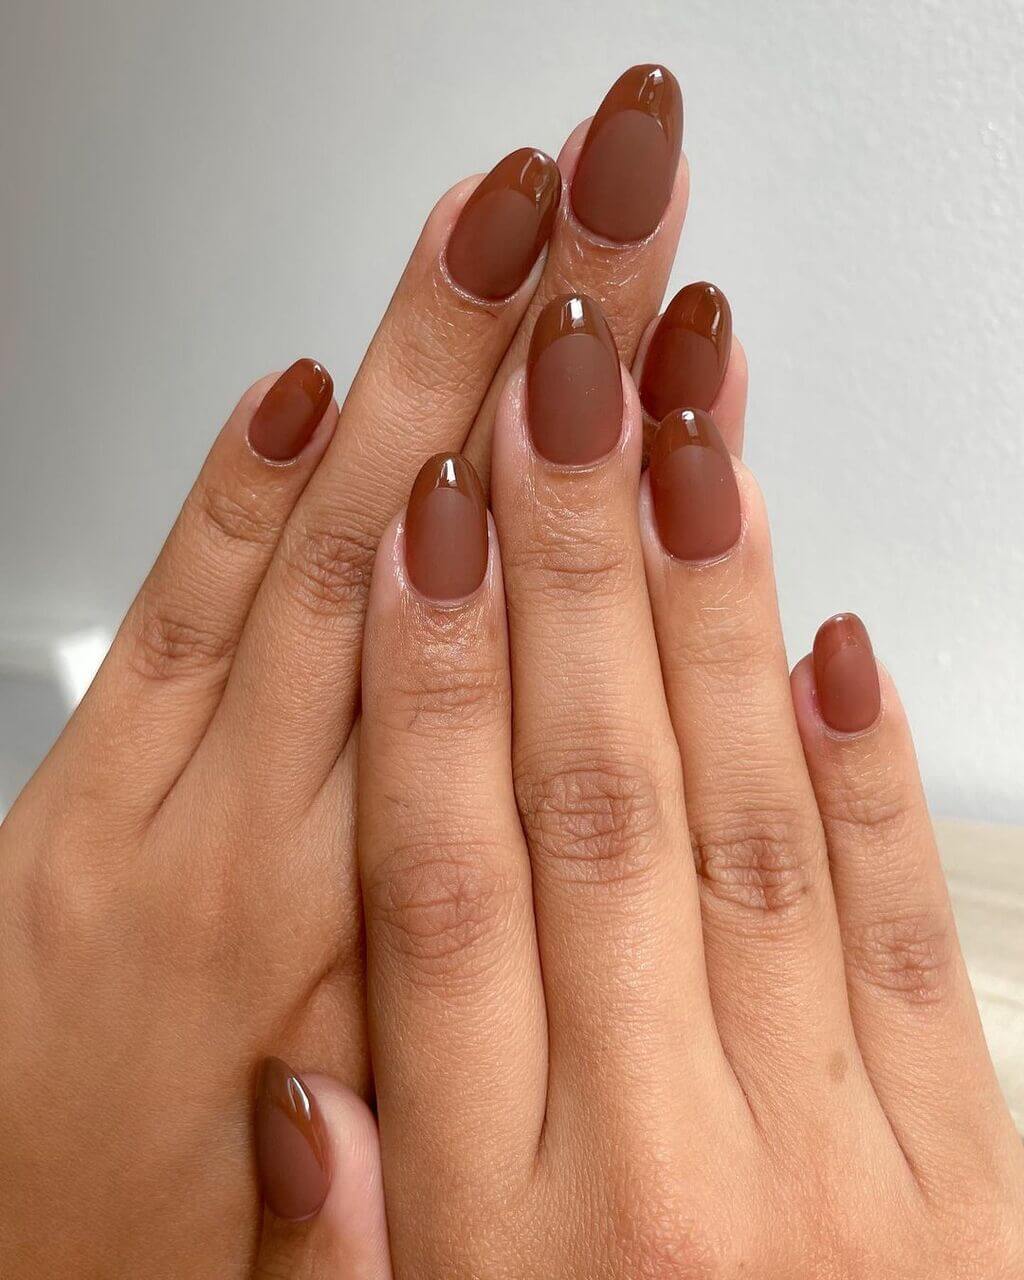 Mattes Brown with Gloss Brown nails ideas